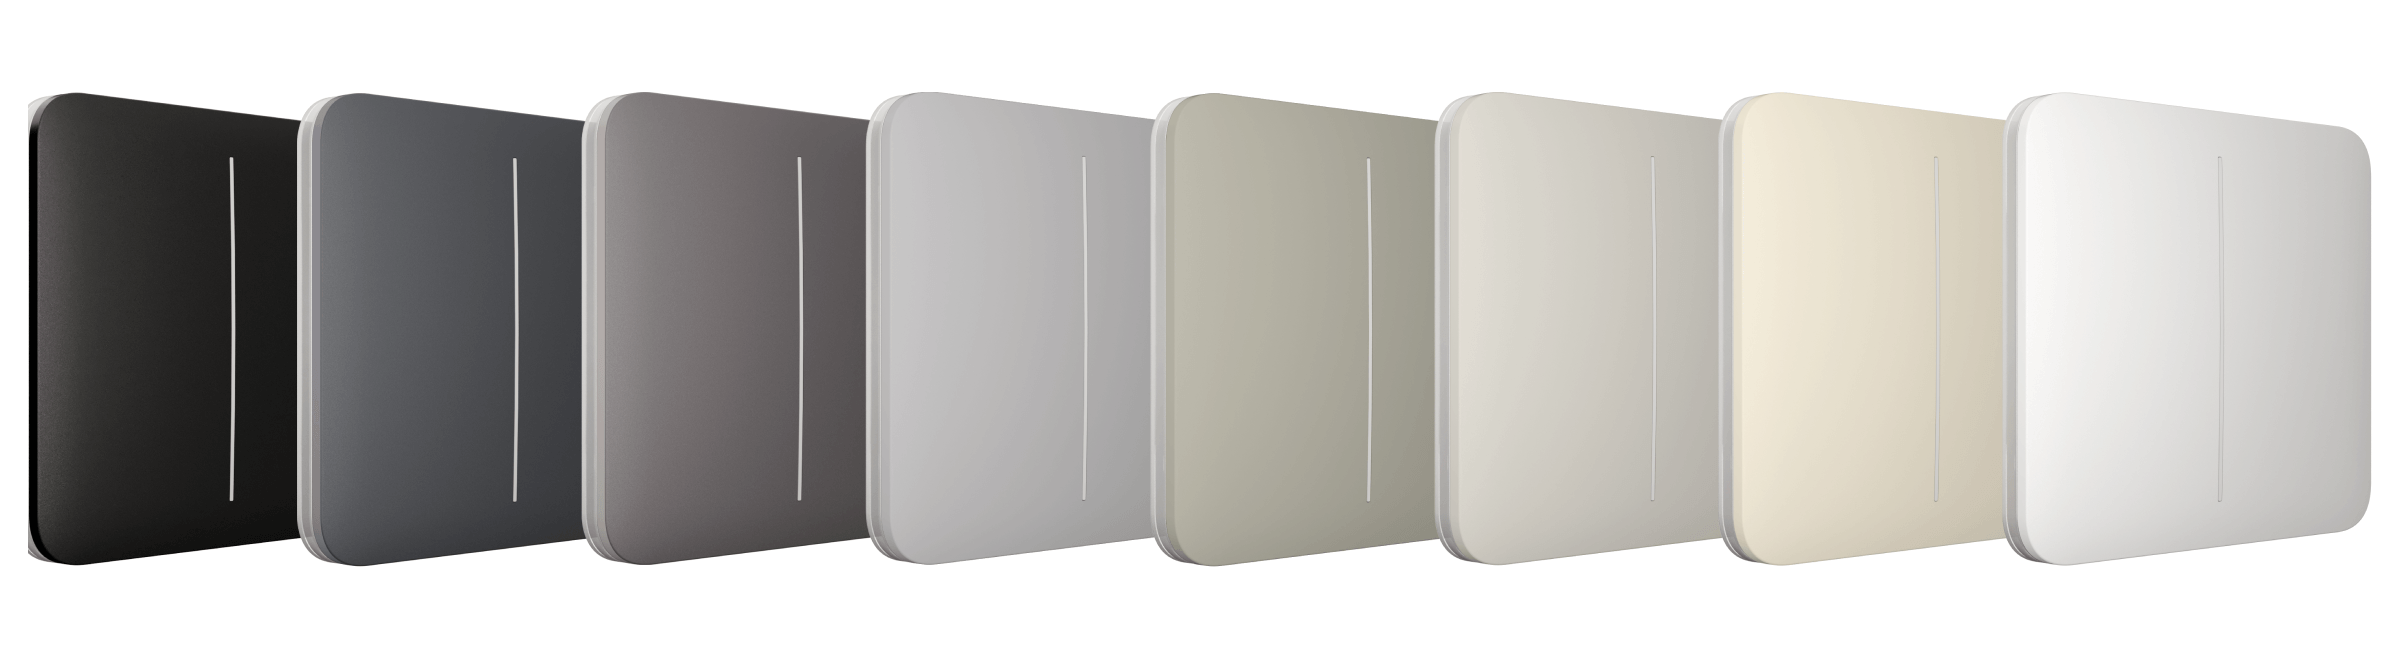 LightSwitch front panels come in white, fog, grey, graphite, ivory, oyster, olive, or black.